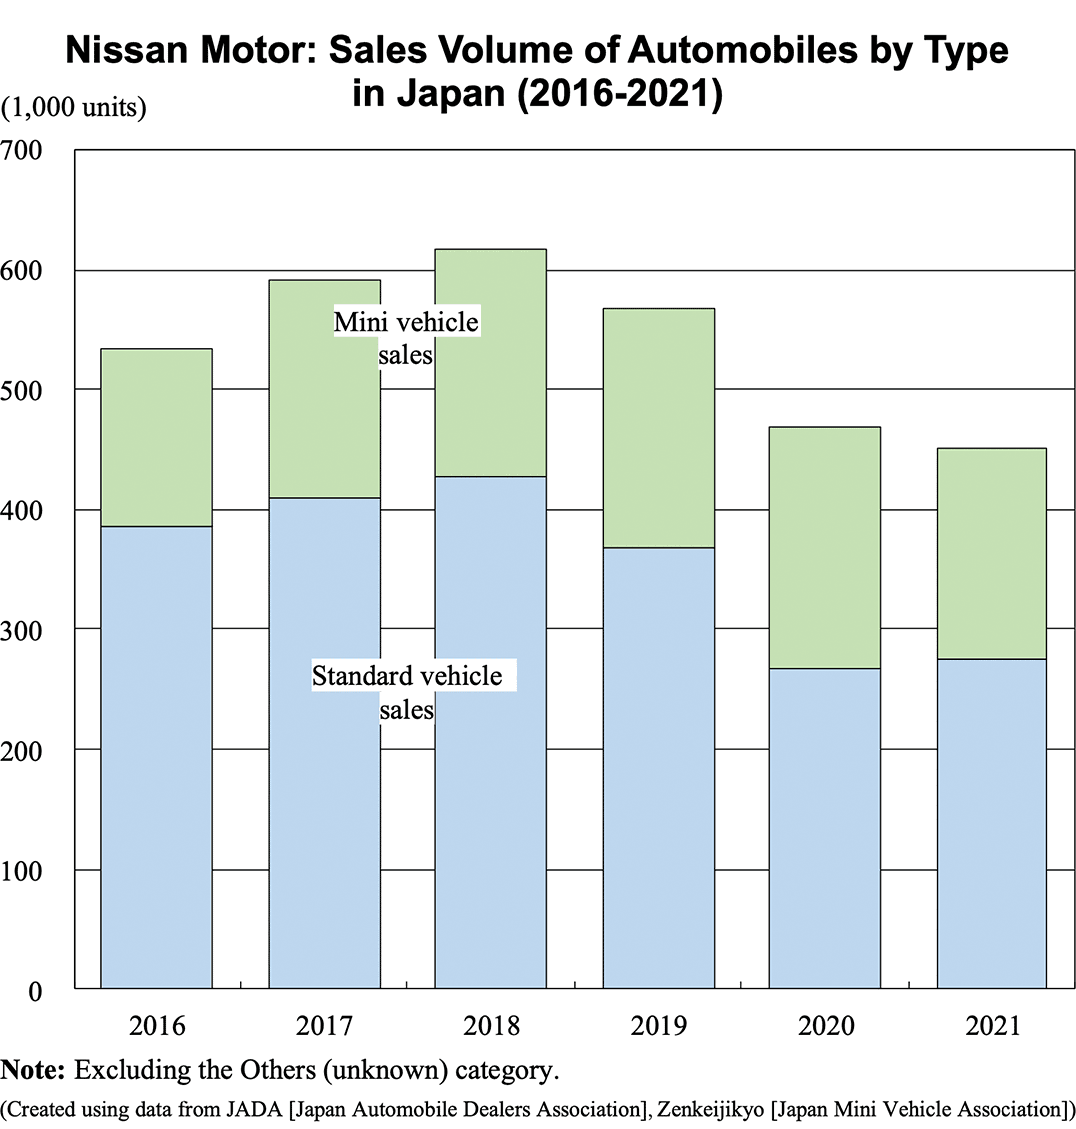 Bar graph: Nissan Motor: Sales Volume of Automobiles by Type in Japan (2016-2021)